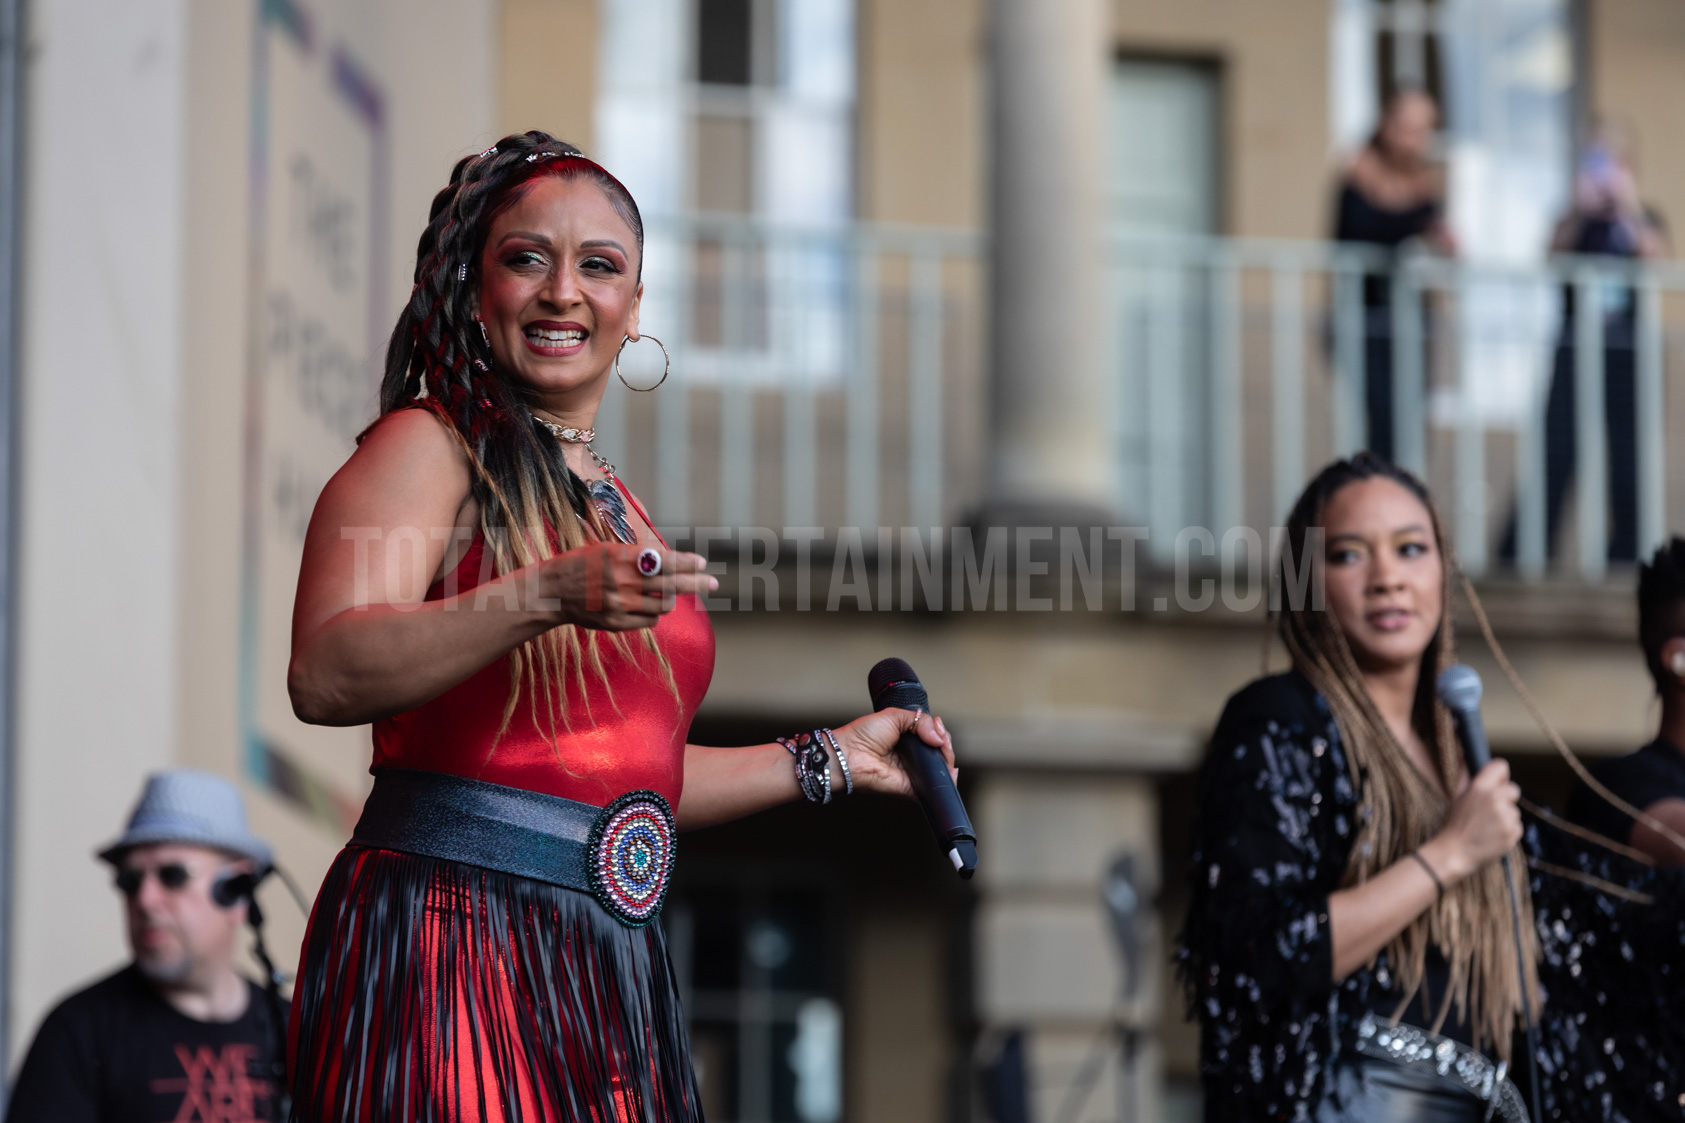 Jo Forrest, Live Event, Music Photography, Totalntertainment, Sister Sledge, The Piece Hall, Halifax, Music Photography